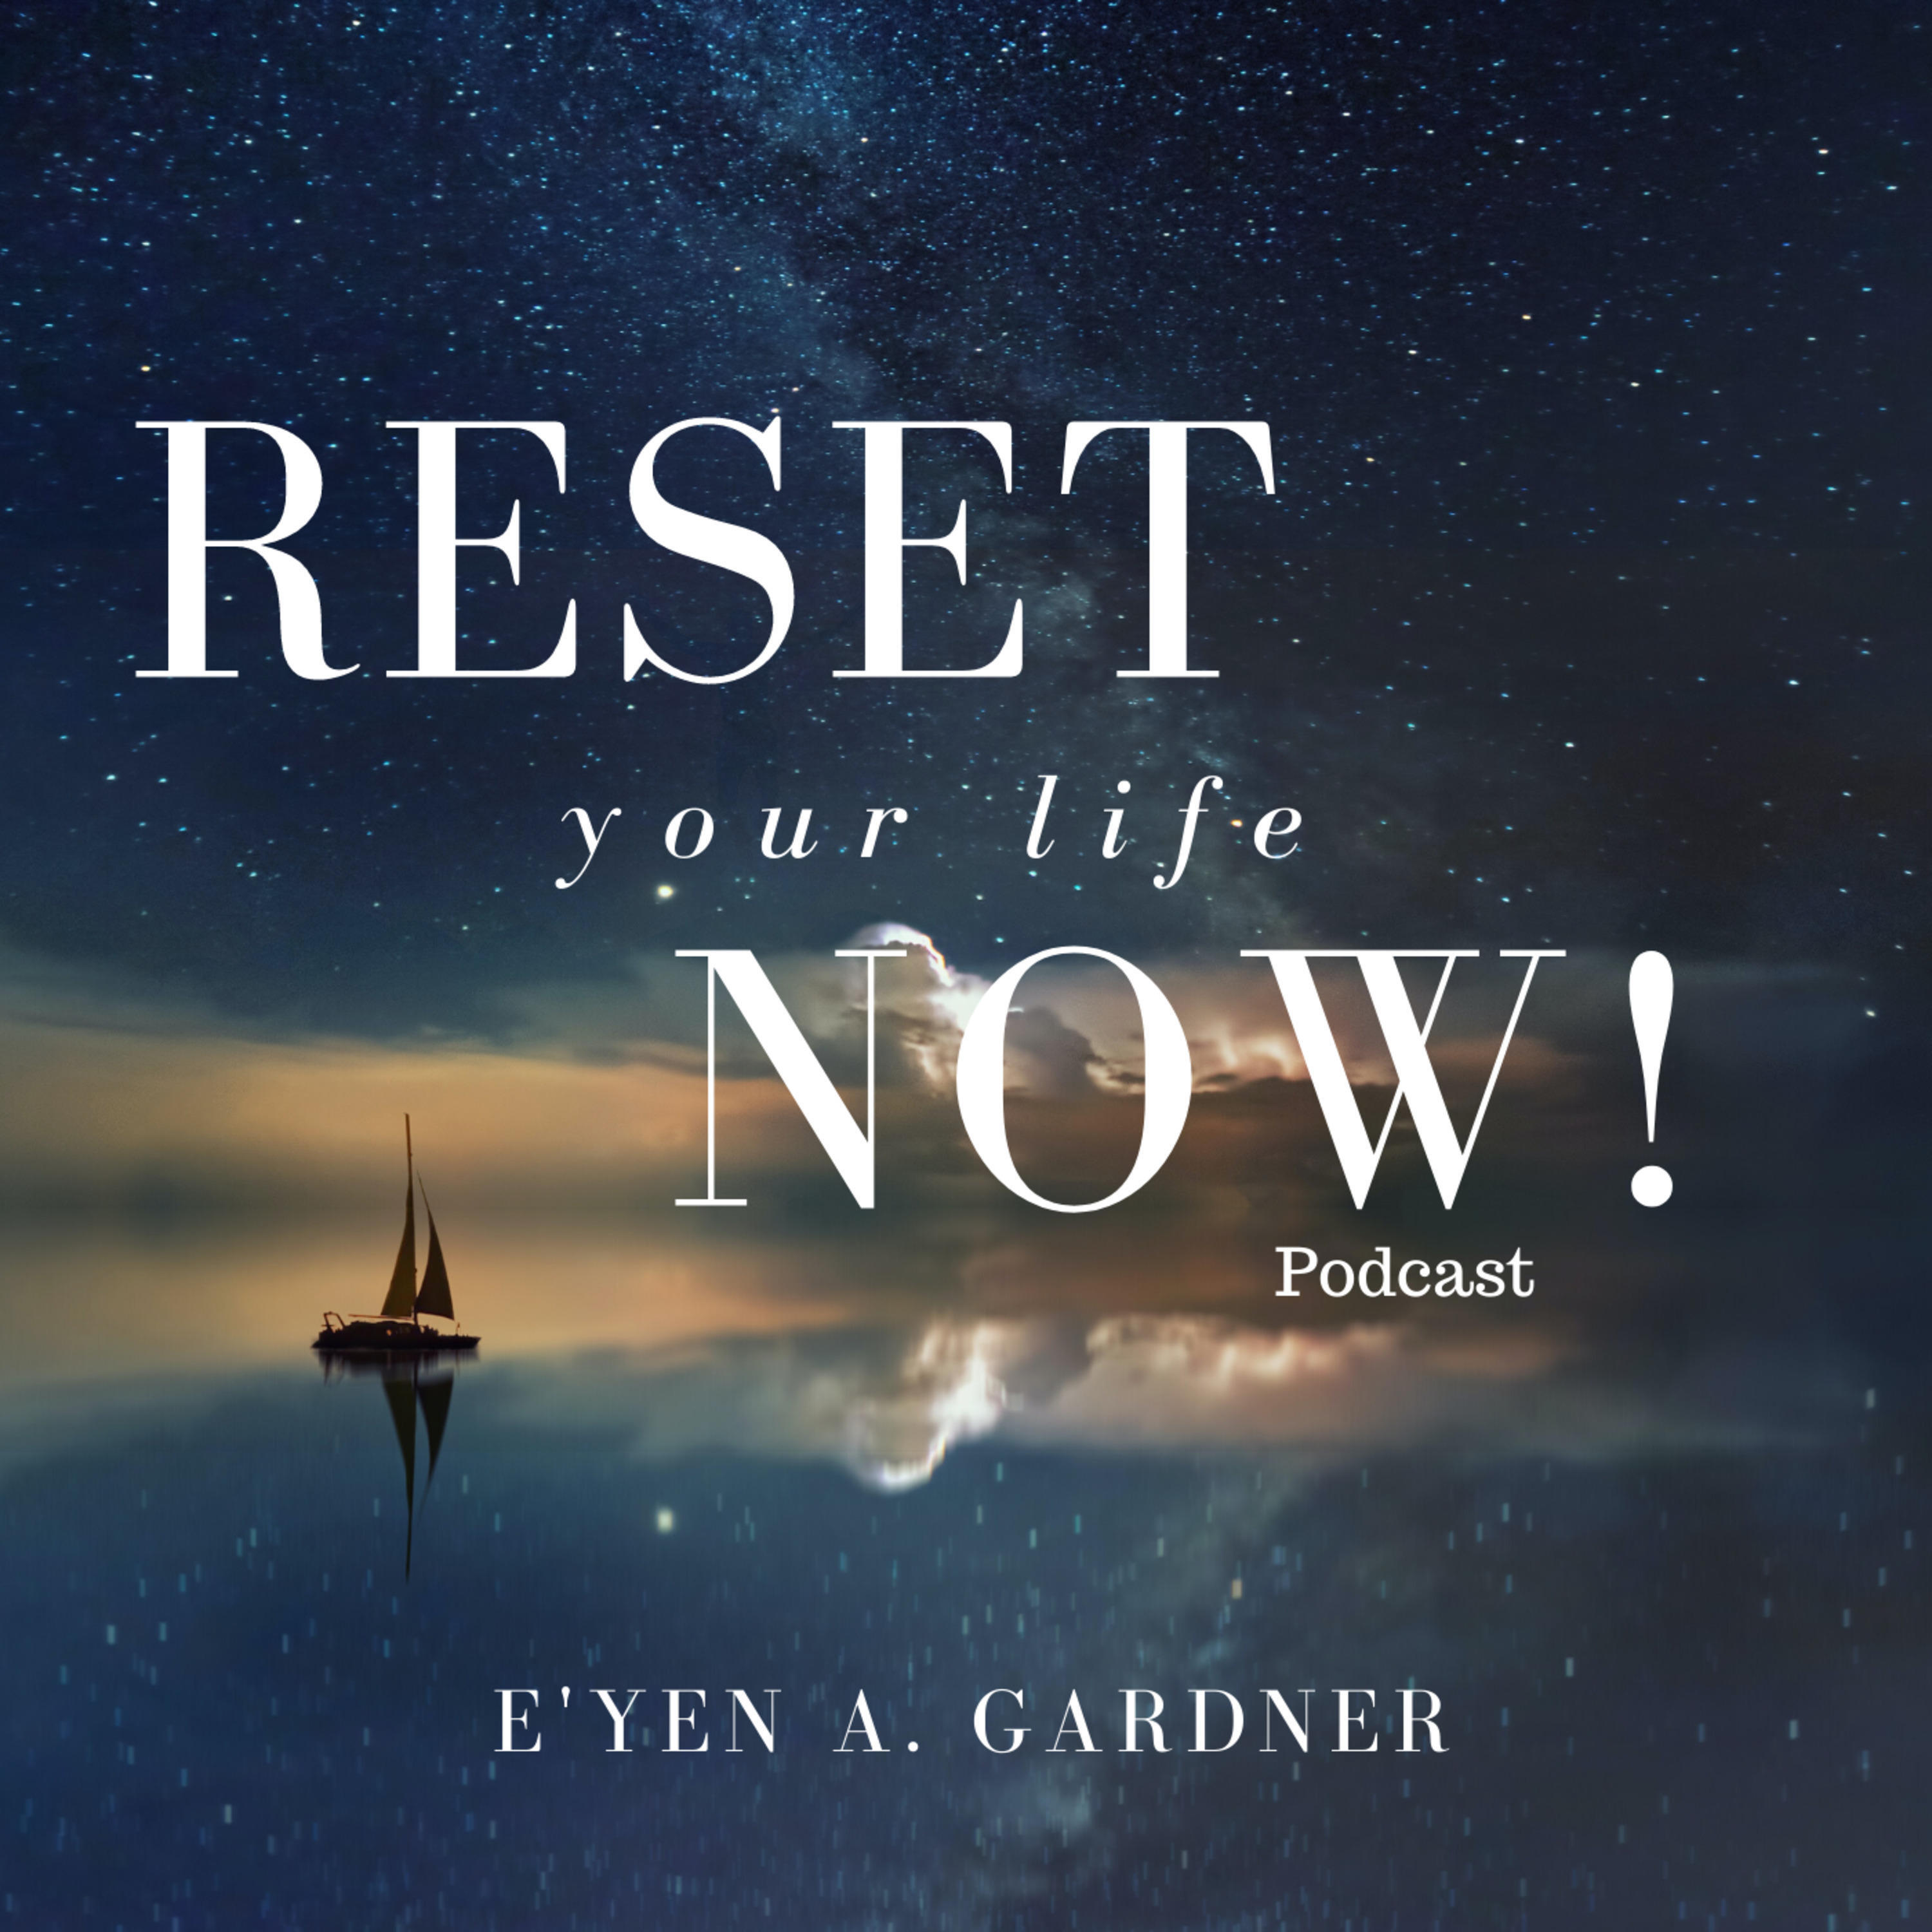 Discovery Now Podcast. Reset Dream. Life is Now. This your Life. My life you now